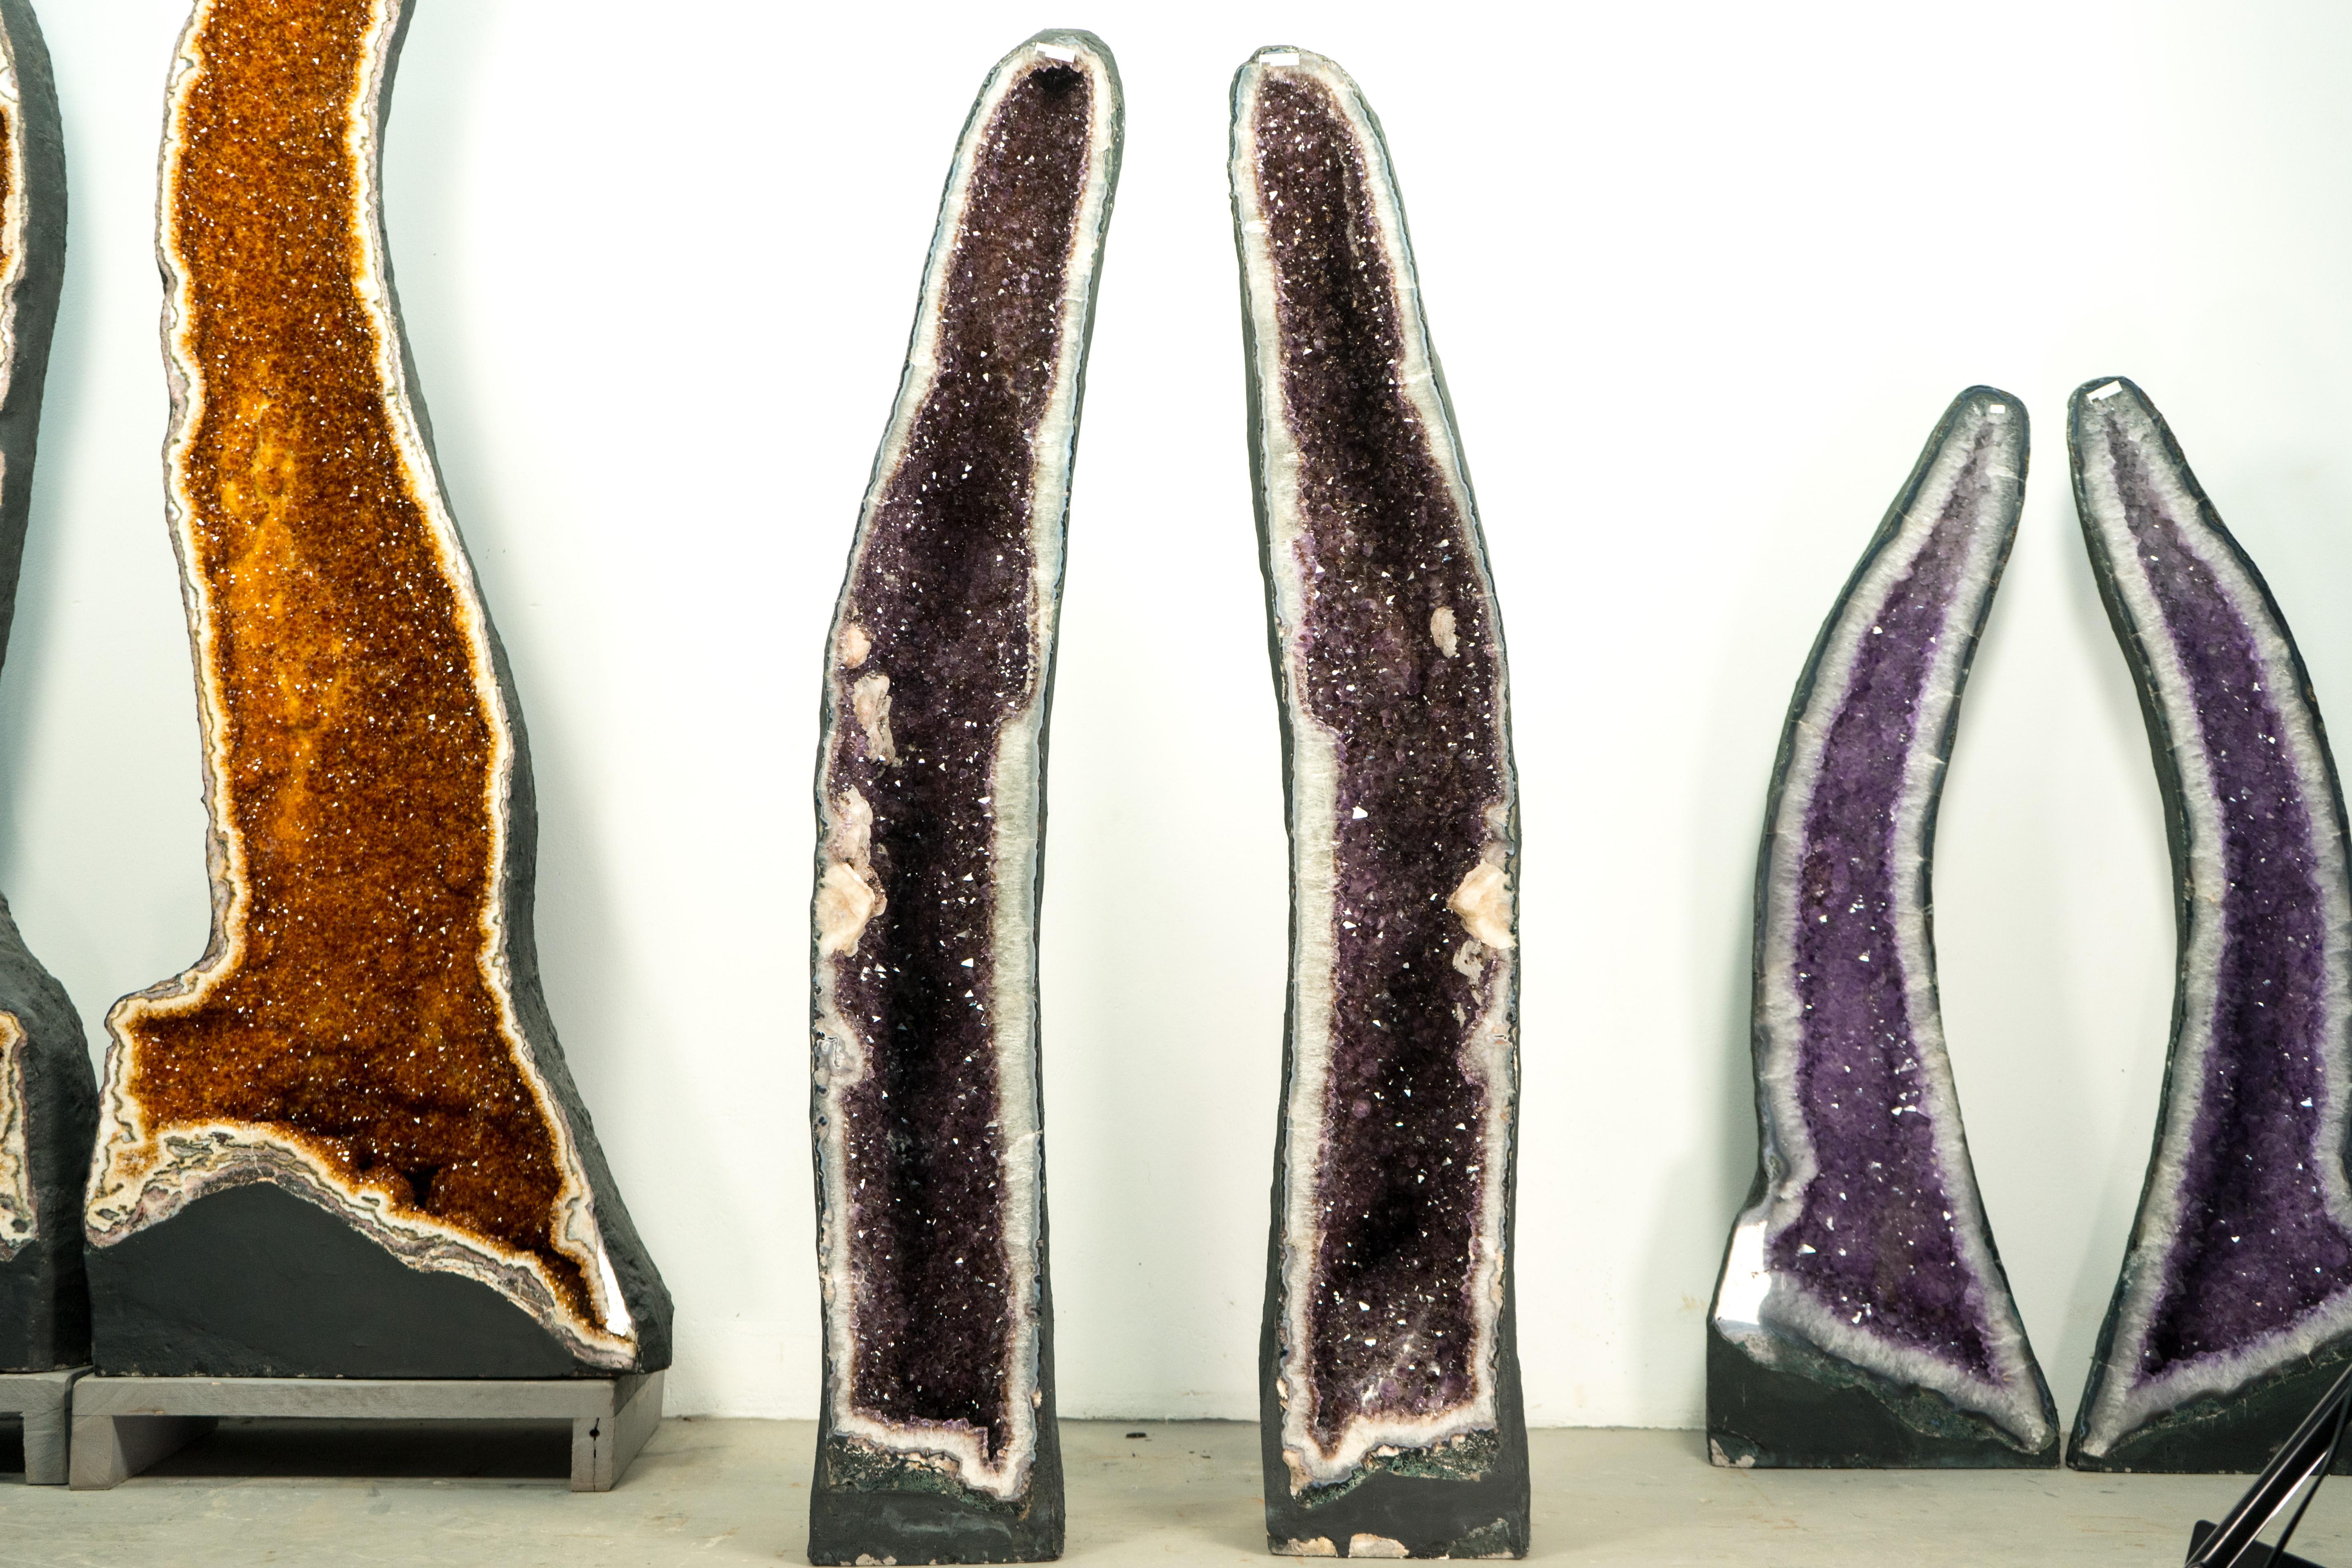 Pair of 5 Ft Tall Large Amethyst Geode Cathedrals with Sparkly Lavender Amethyst For Sale 9